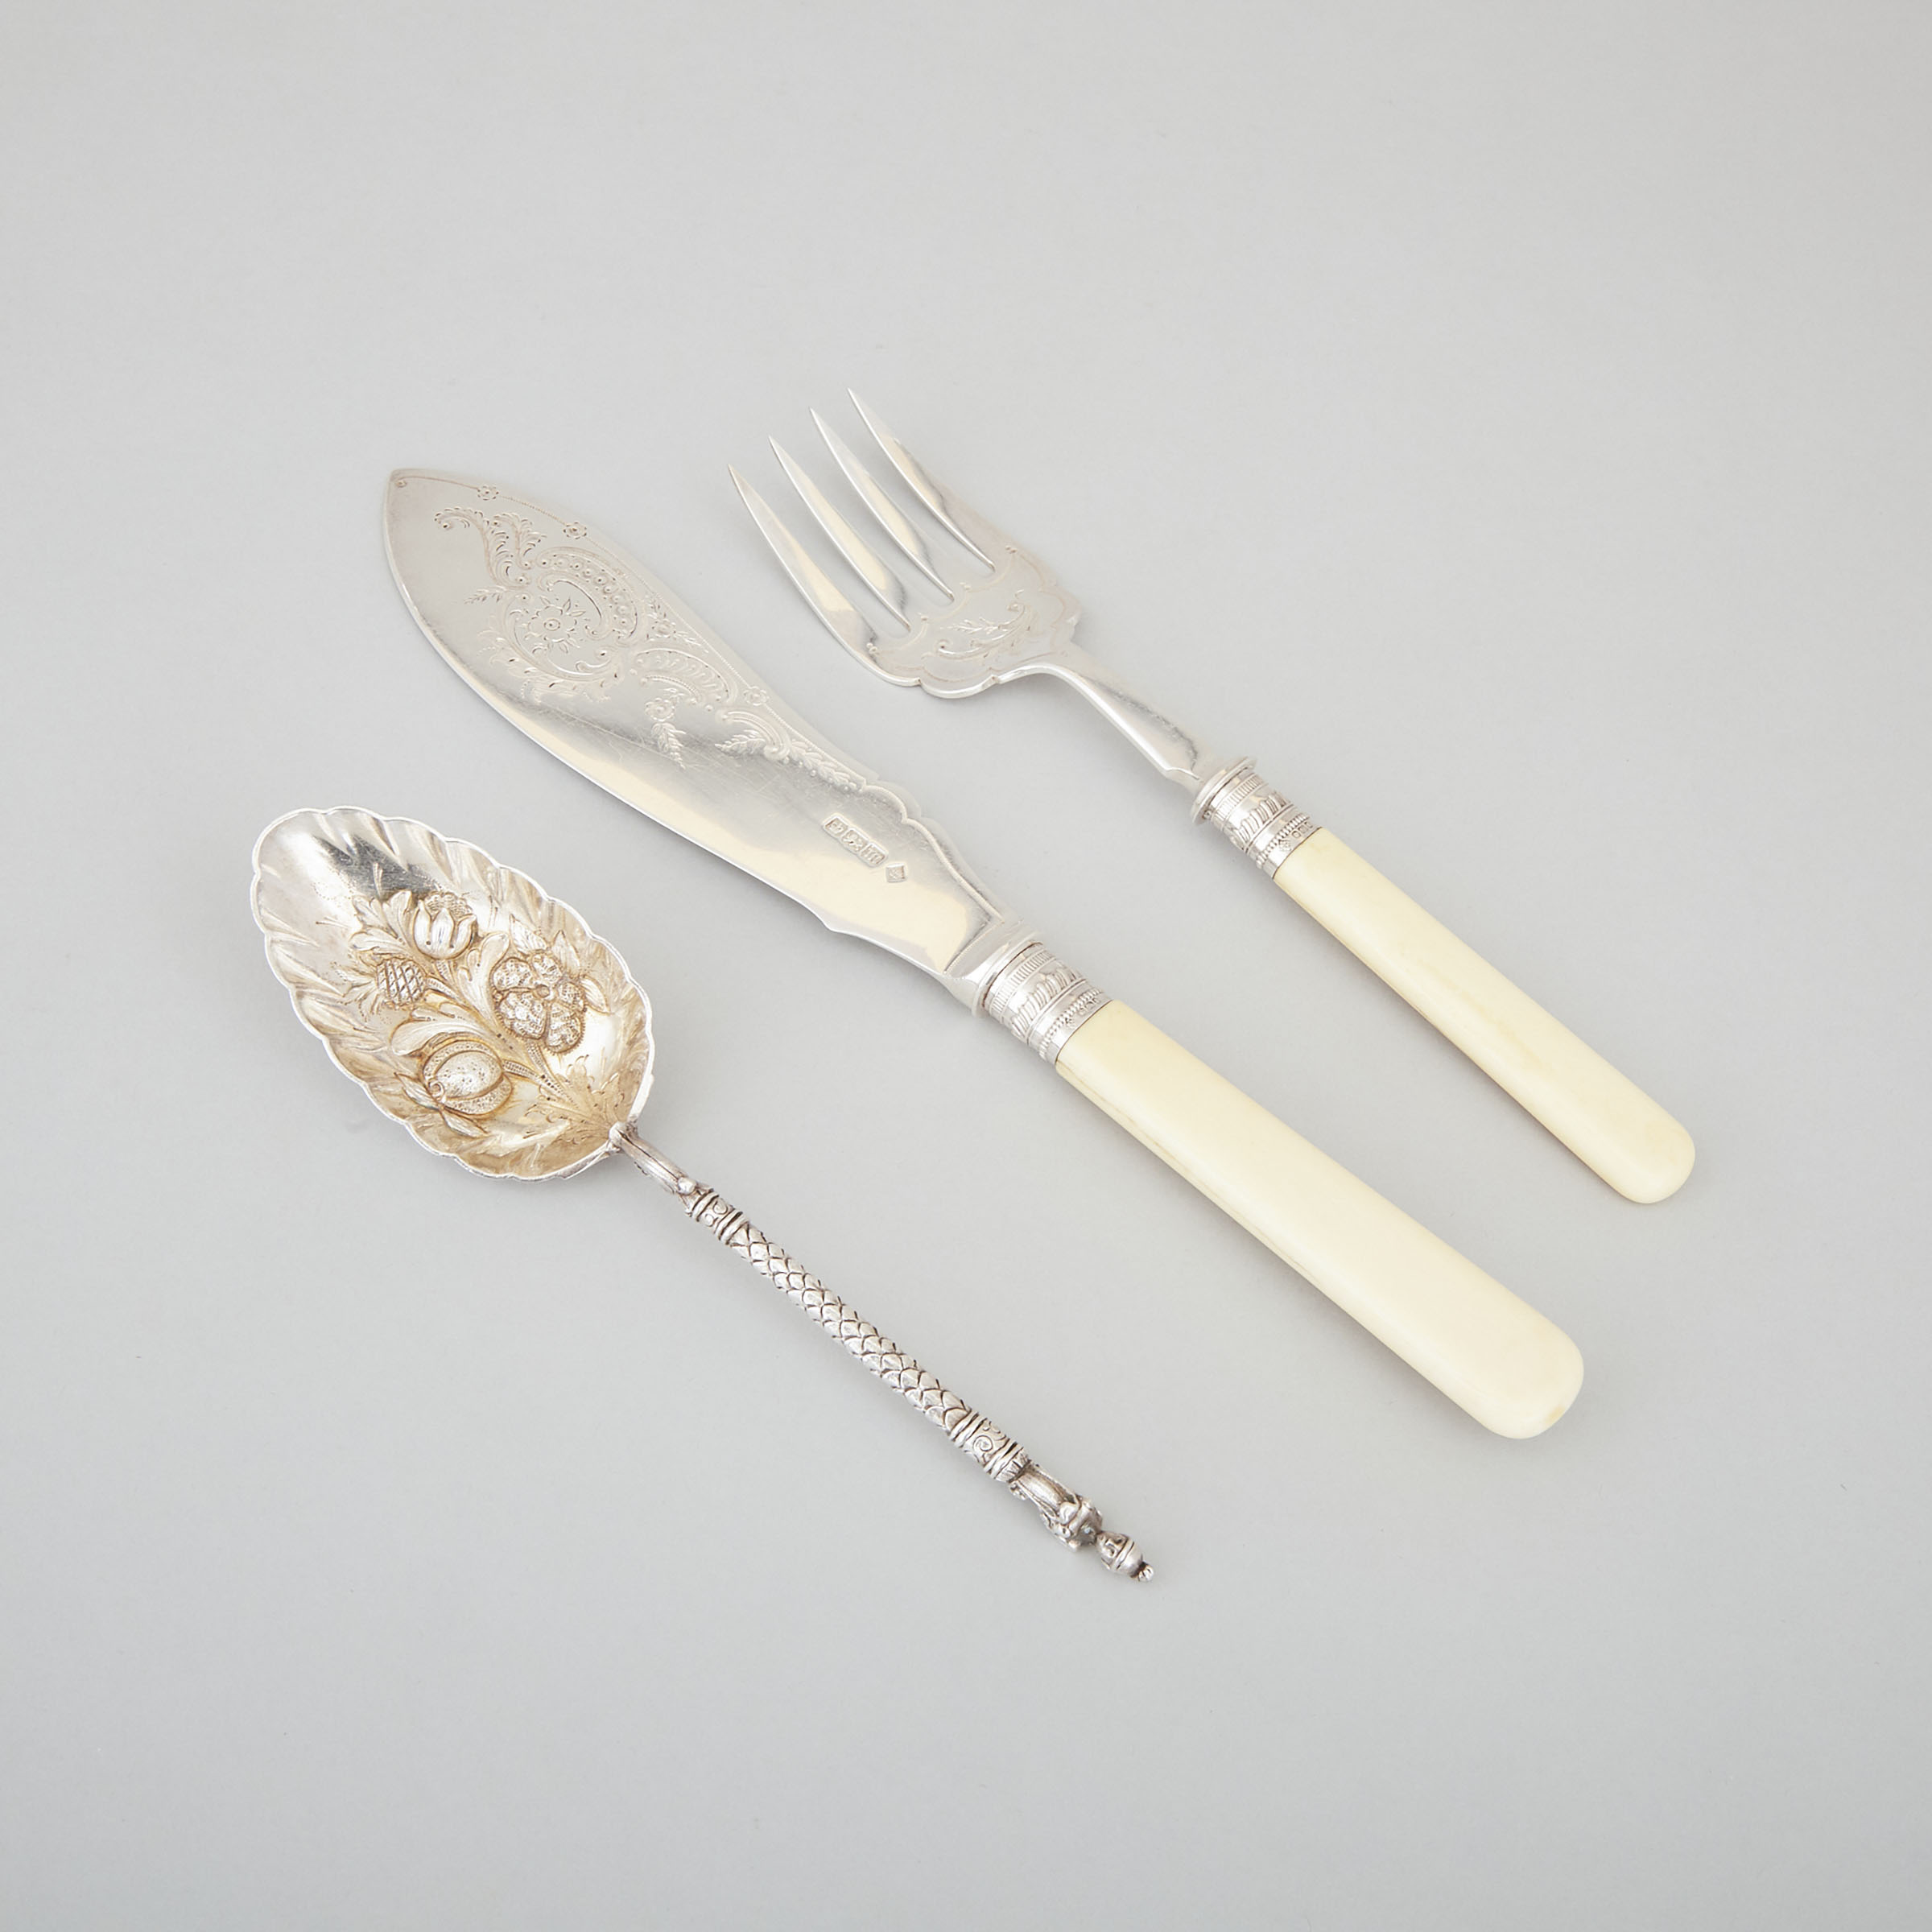 Victorian Silver Berry Spoon, William Hutton & Sons, London, 1883 and a Pair of Edwardian Silver Fish Servers, Martin & Hall, Sheffield, 1904